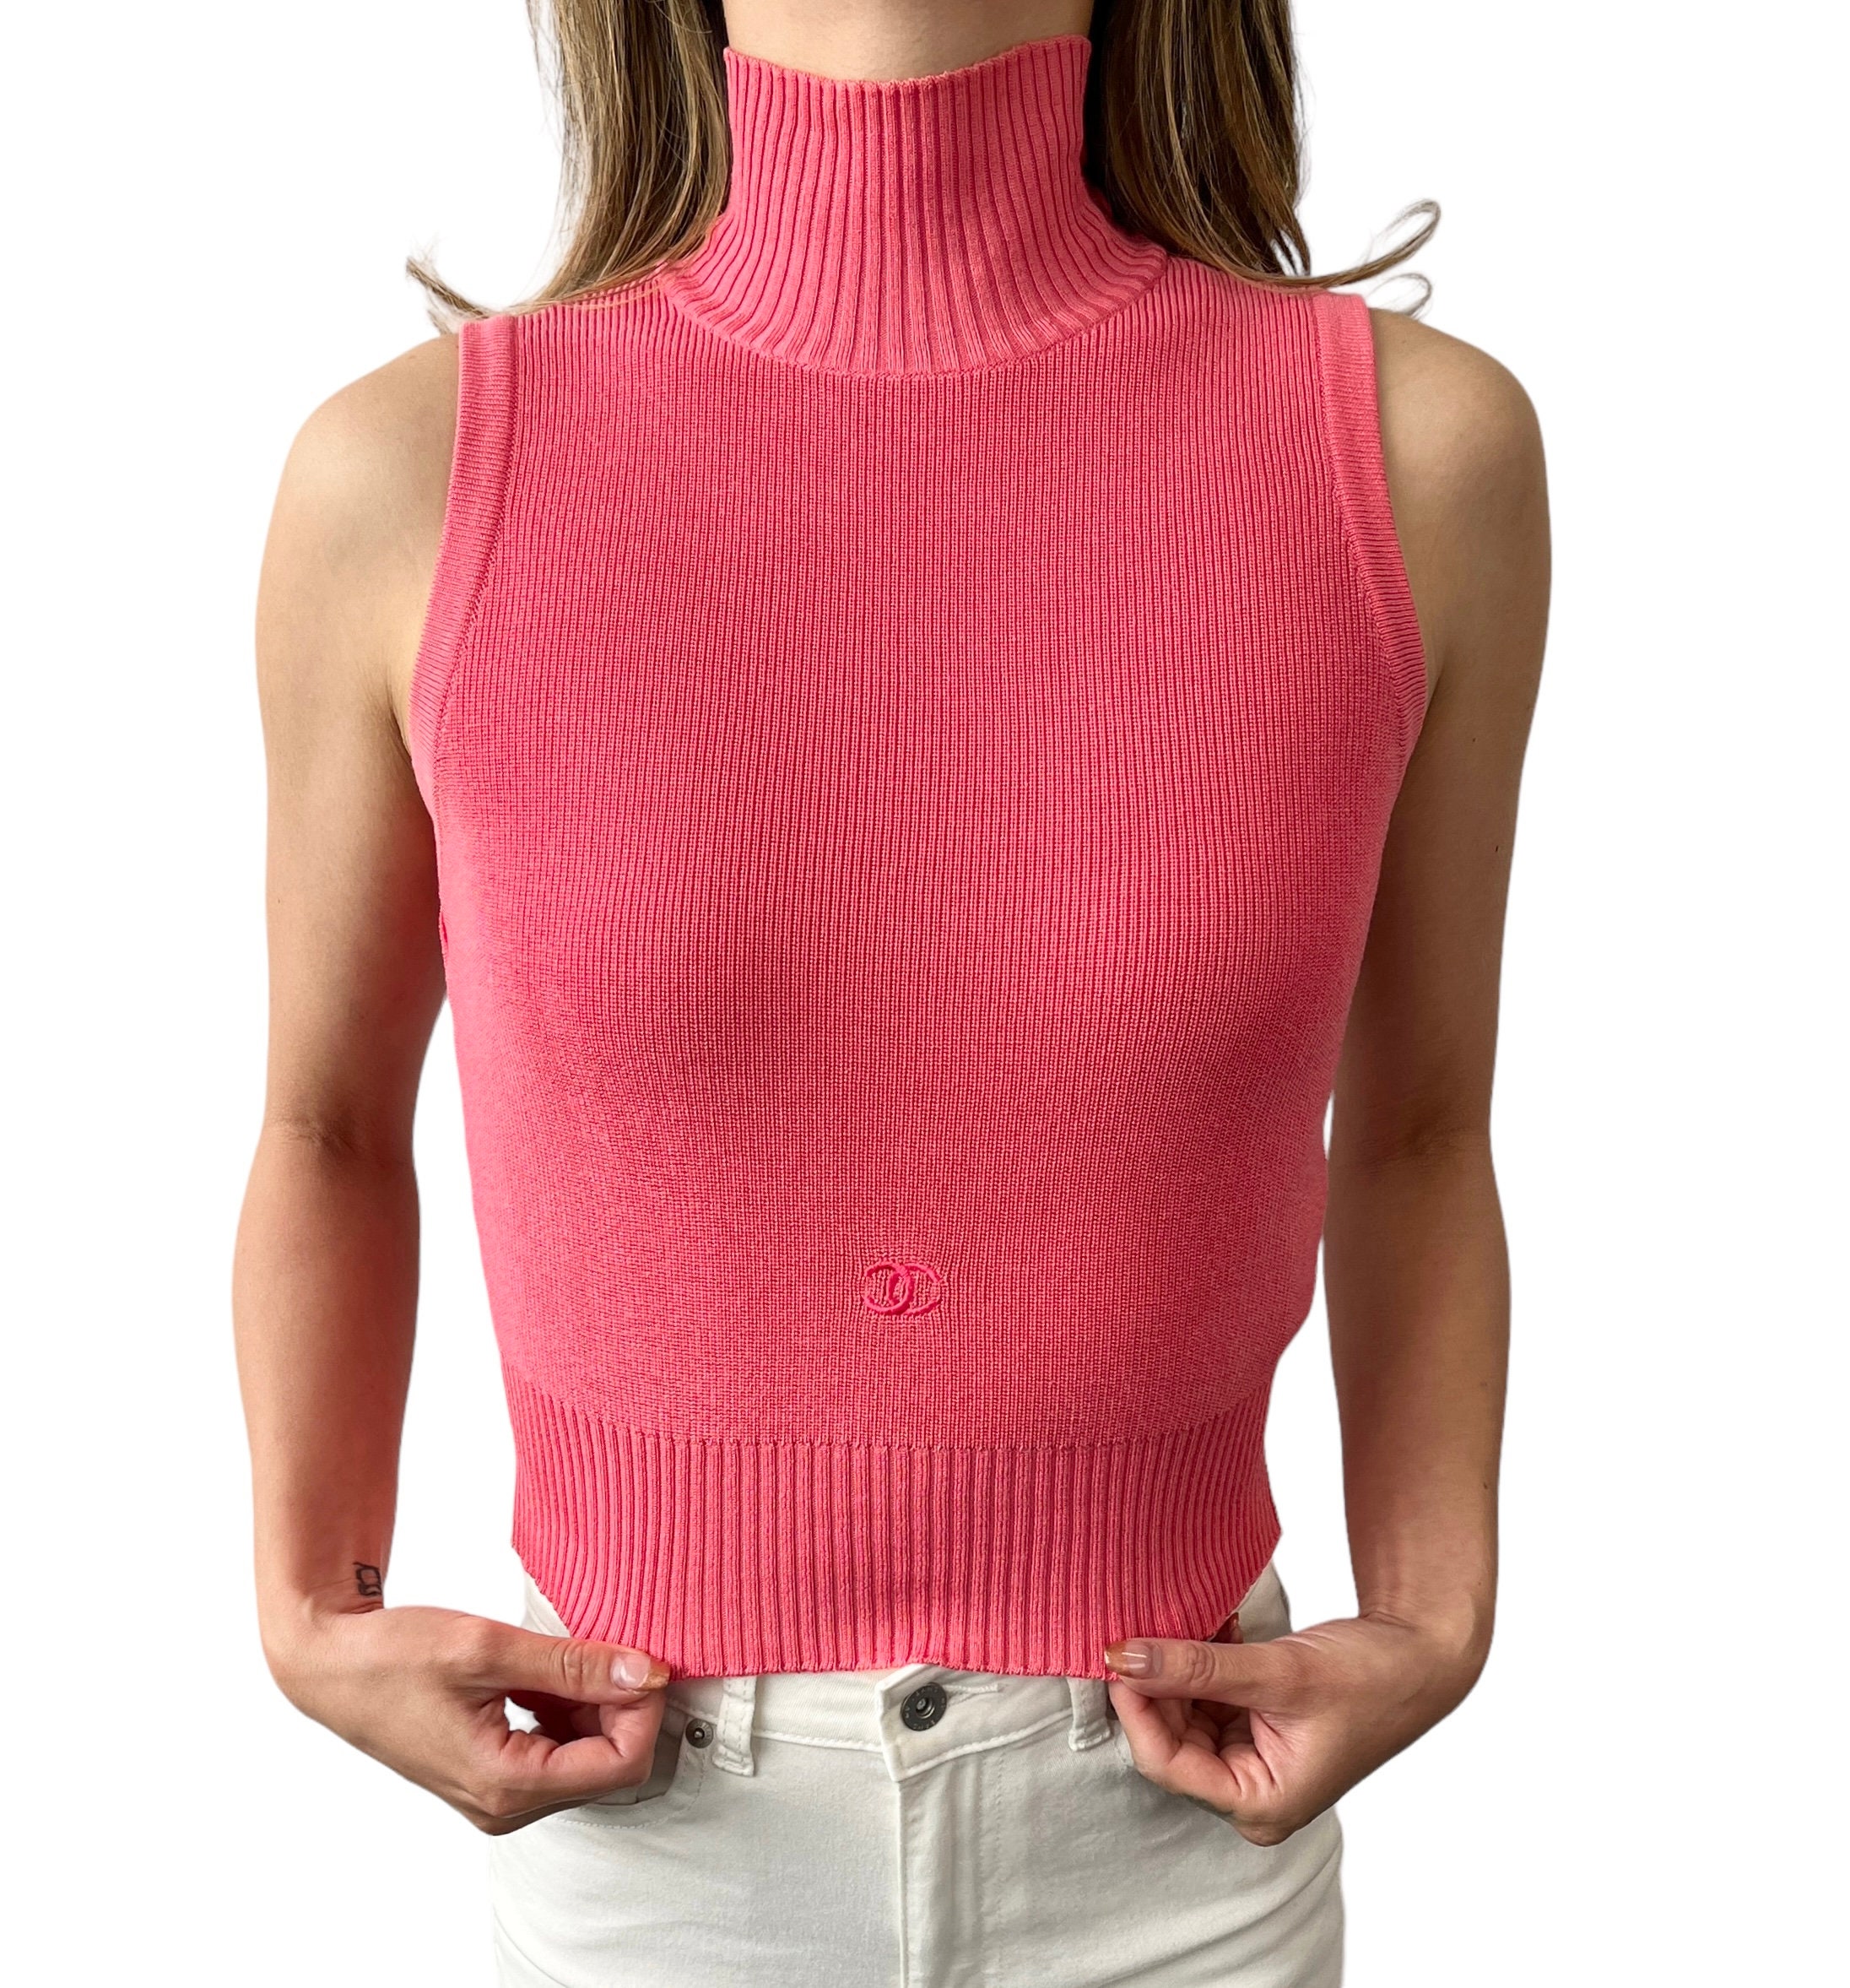 Chanel Pink Sweater -  Sweden